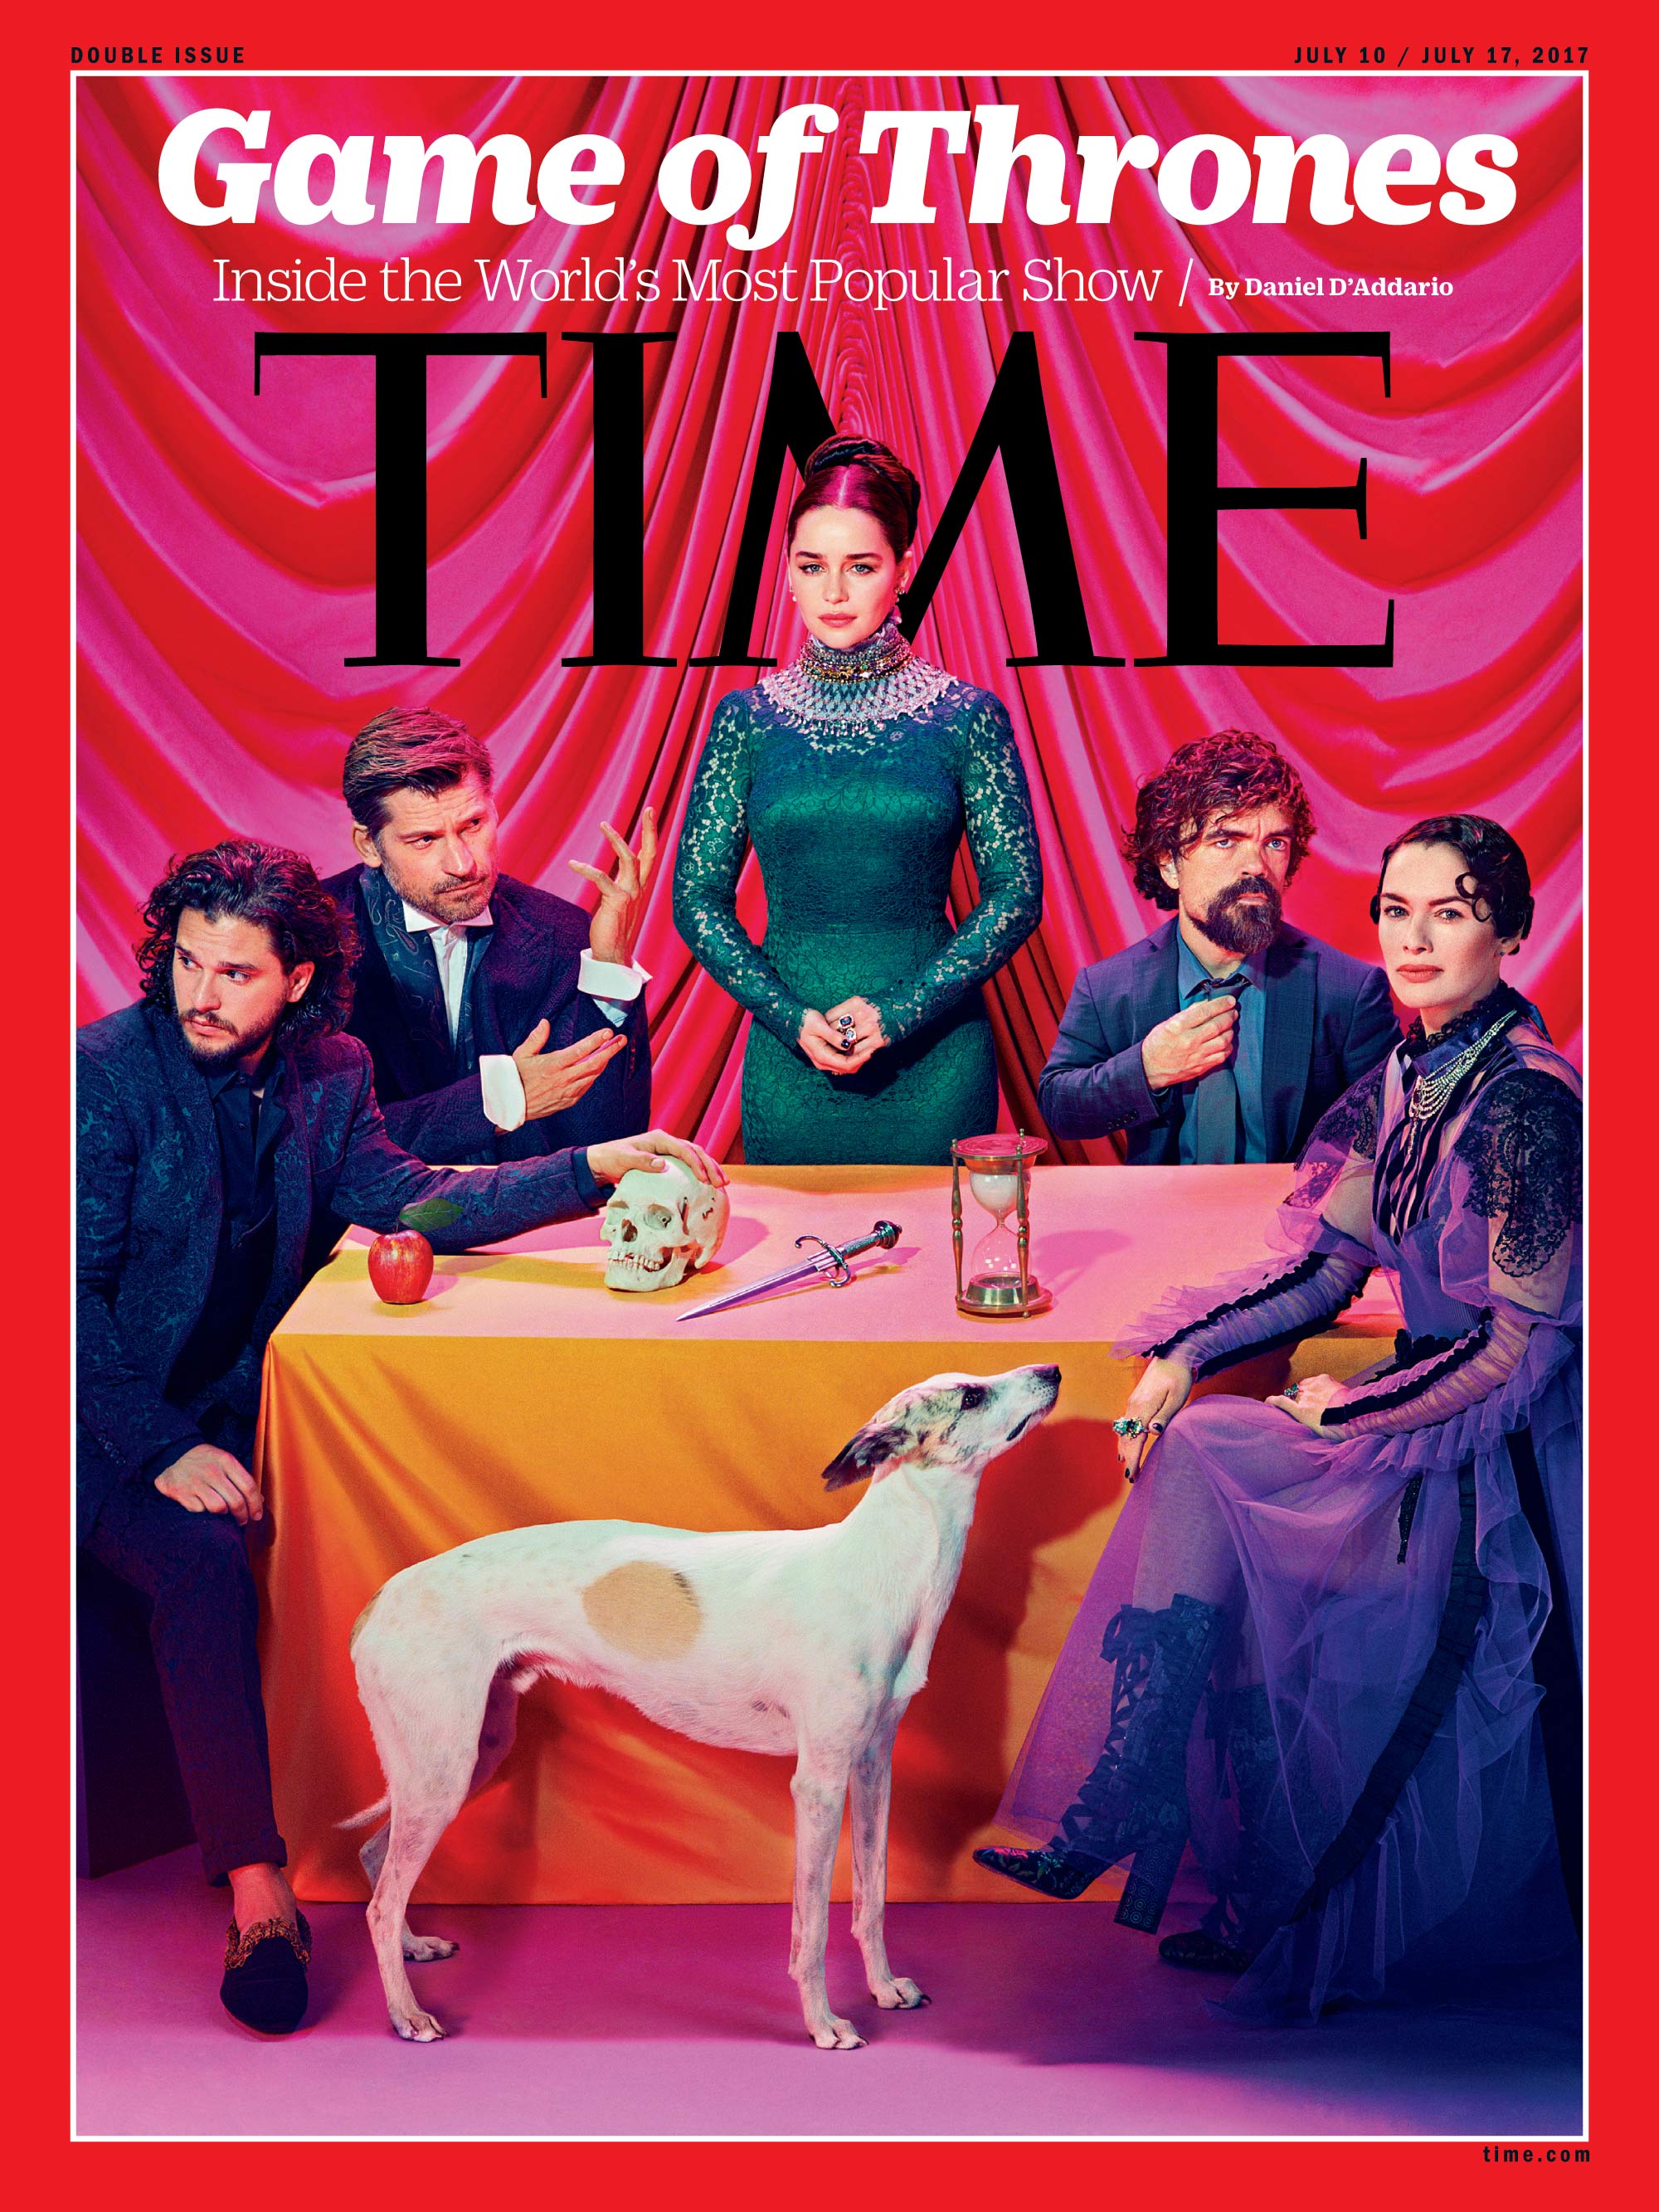  Photo composite by Miles Aldridge for TIME   See the behind the scenes of the photo shoot  